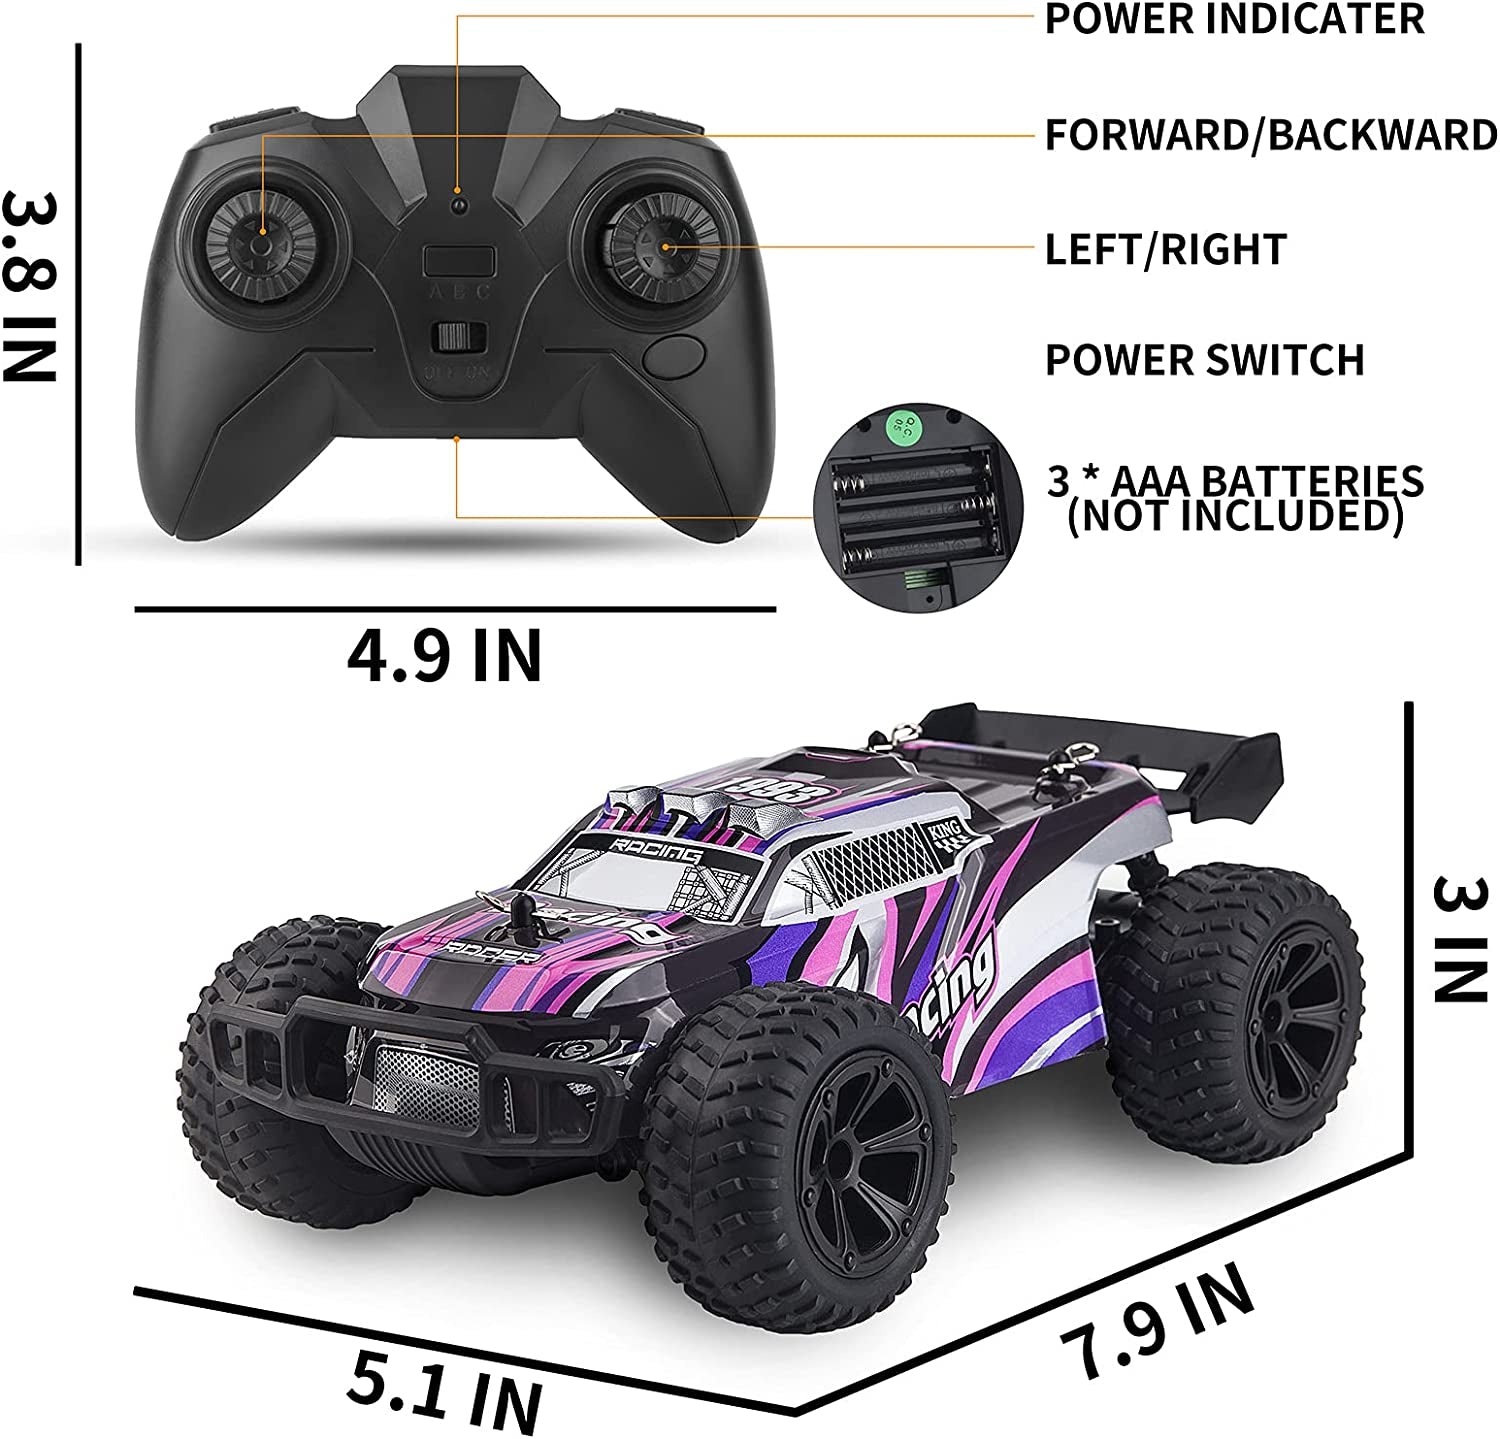 Remote Control Car, Led Light 2.4Ghz Powerful Offroad High Speed Racing Rc Car, Hobby Electric Toy Car 1:22 Multi-Terrain Buggy Crawler Truck with Rechargeable Battery, Gift for Boy Girl Kid